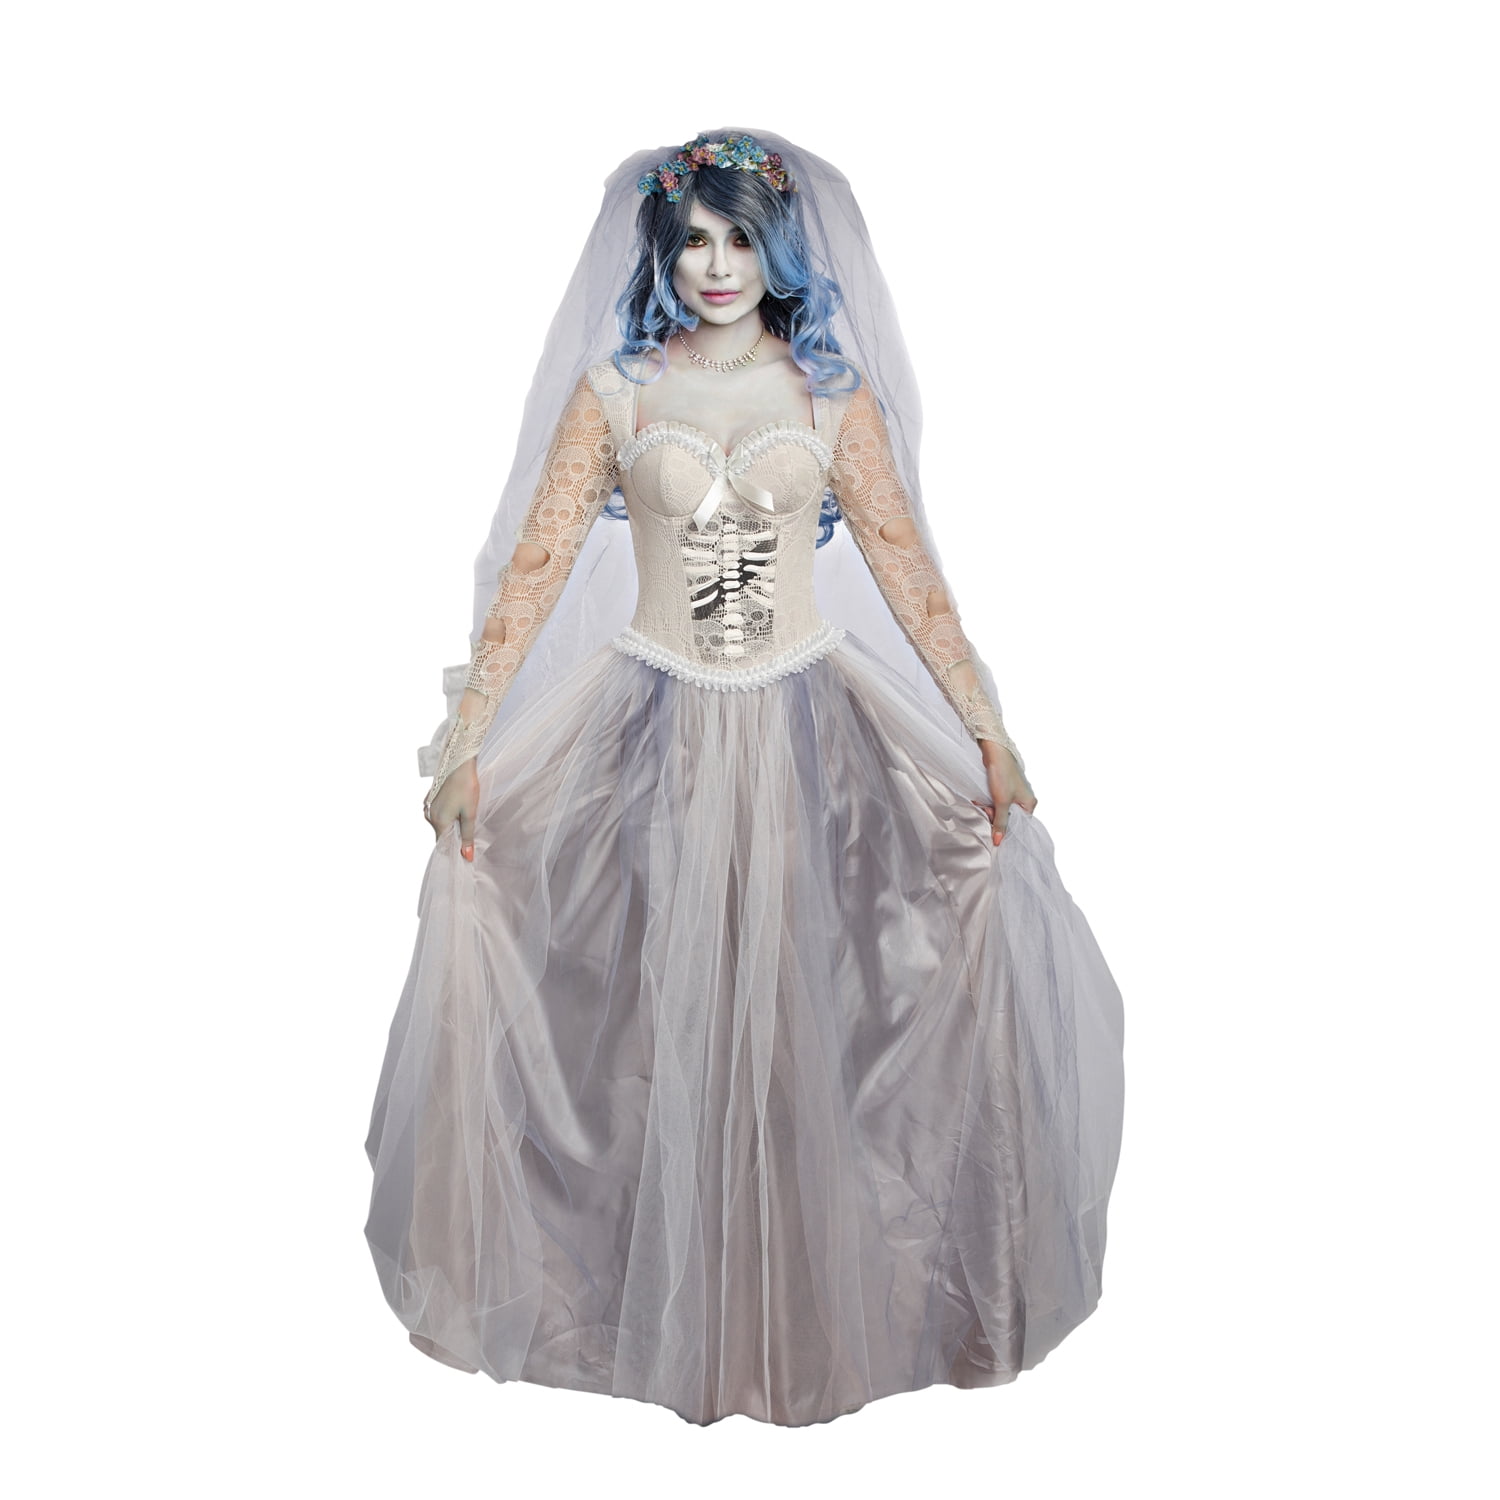 Dreamgirl Dying To Marry Women's Costume - Walmart.com